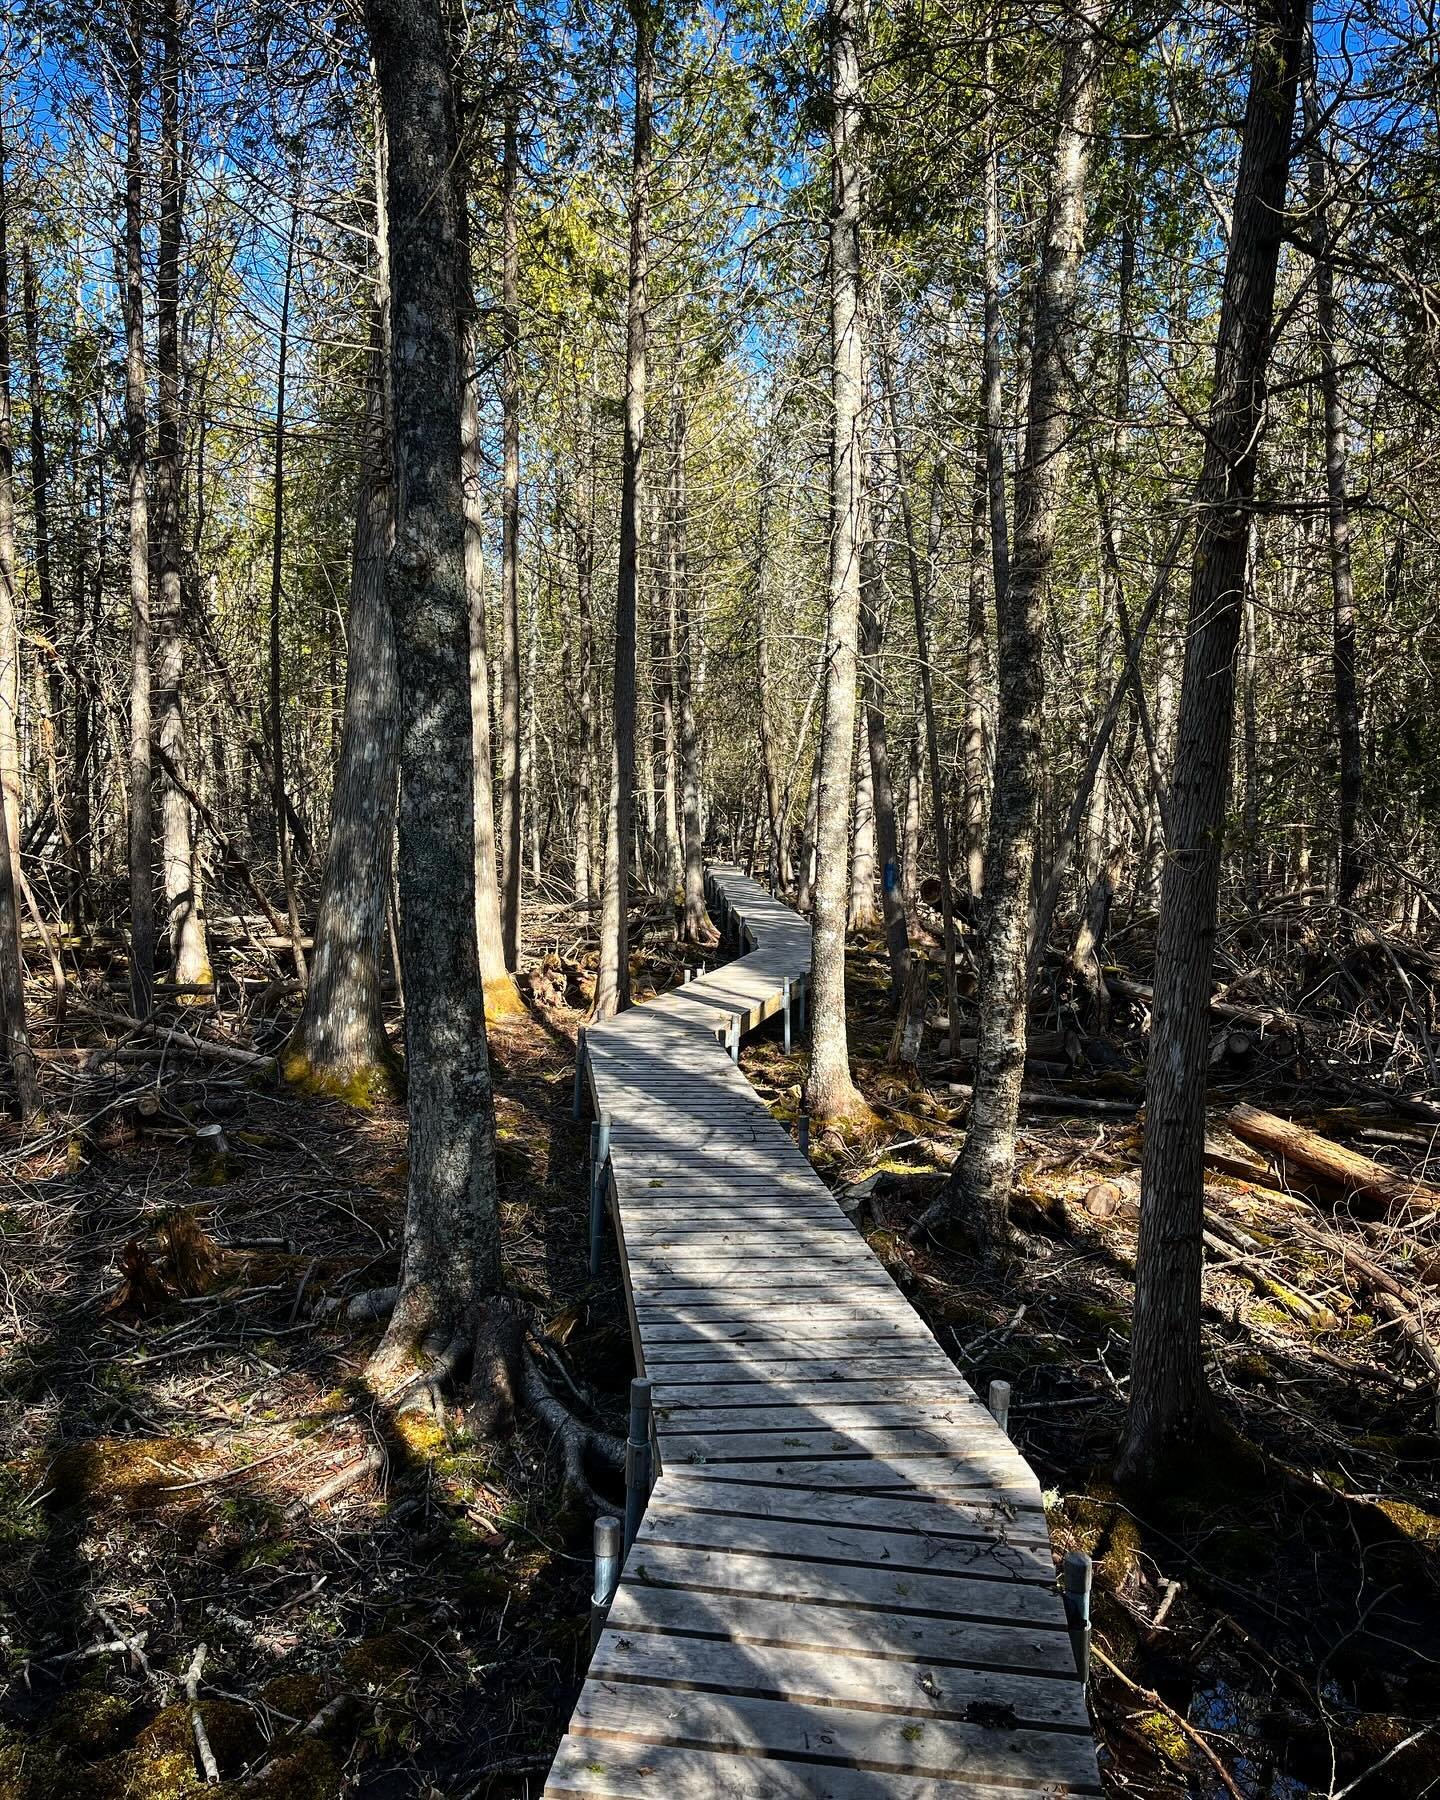 It feels like spring out here on the trails! 

#spring #swamp #boardwalk #springpeepers #skunkcabbage #cedars